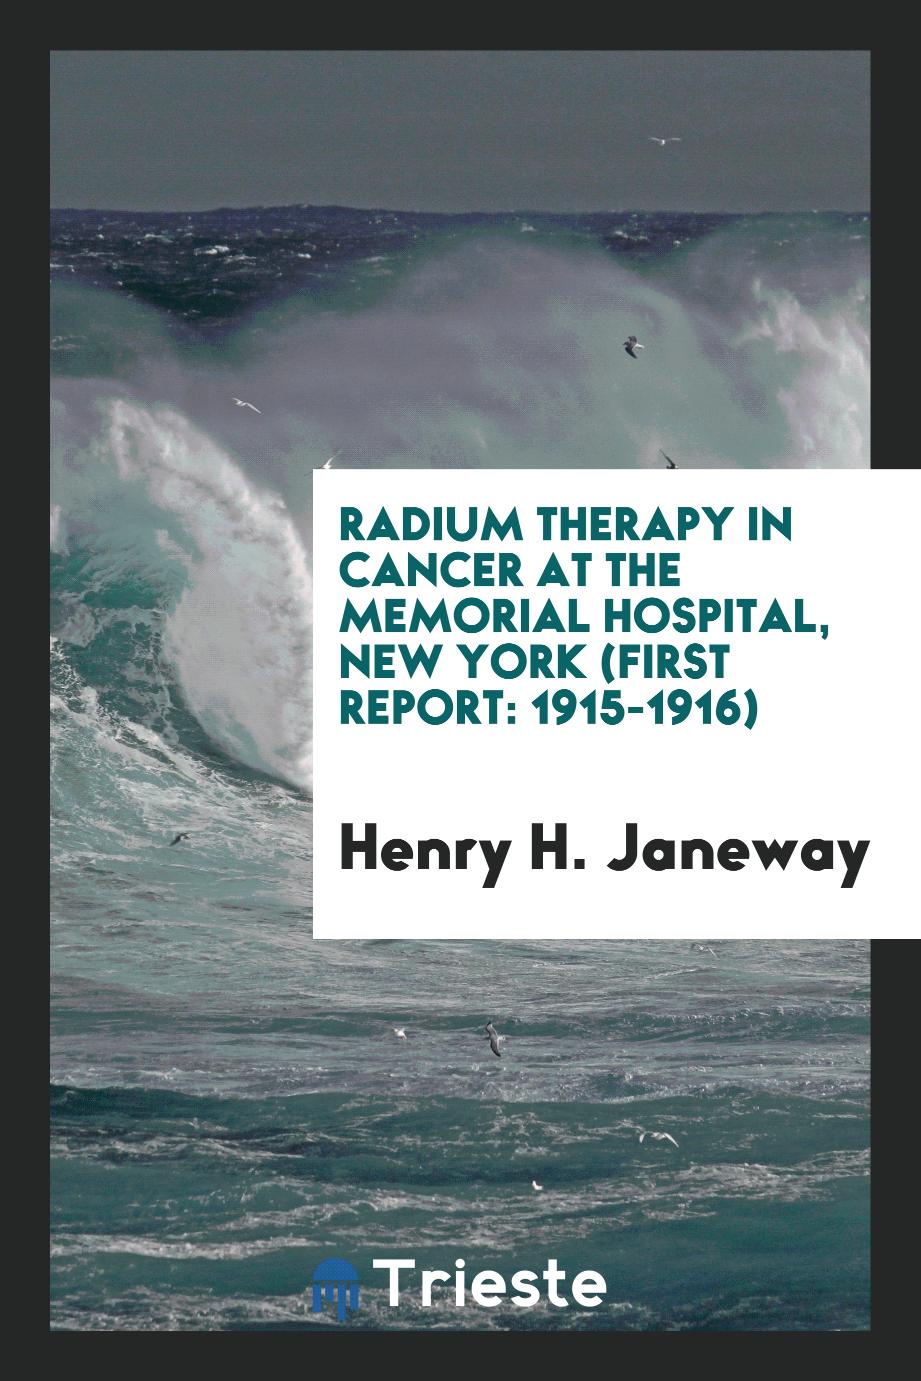 Radium therapy in cancer at the Memorial Hospital, New York (First report: 1915-1916)